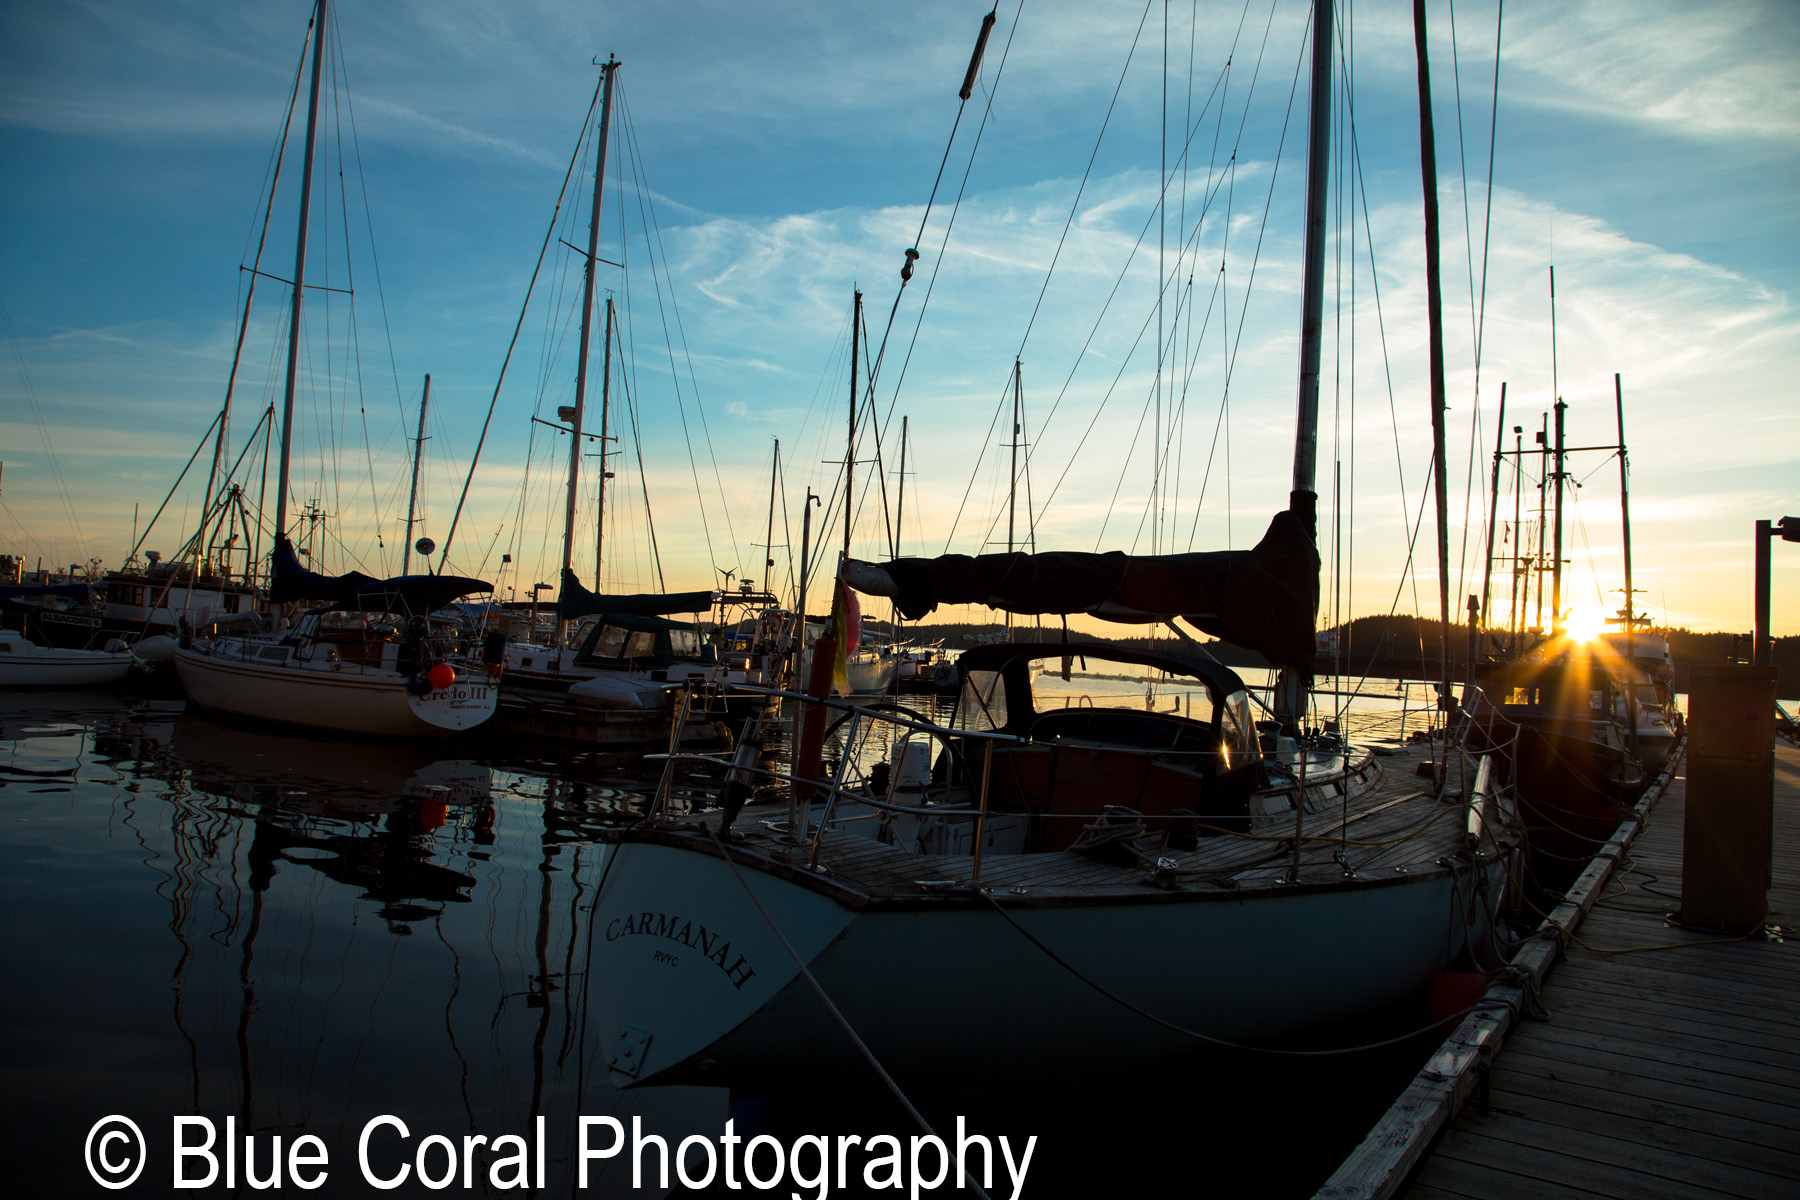 Prince Rupert Rowing & Yachting Club - Photography © Blue Coral Photography